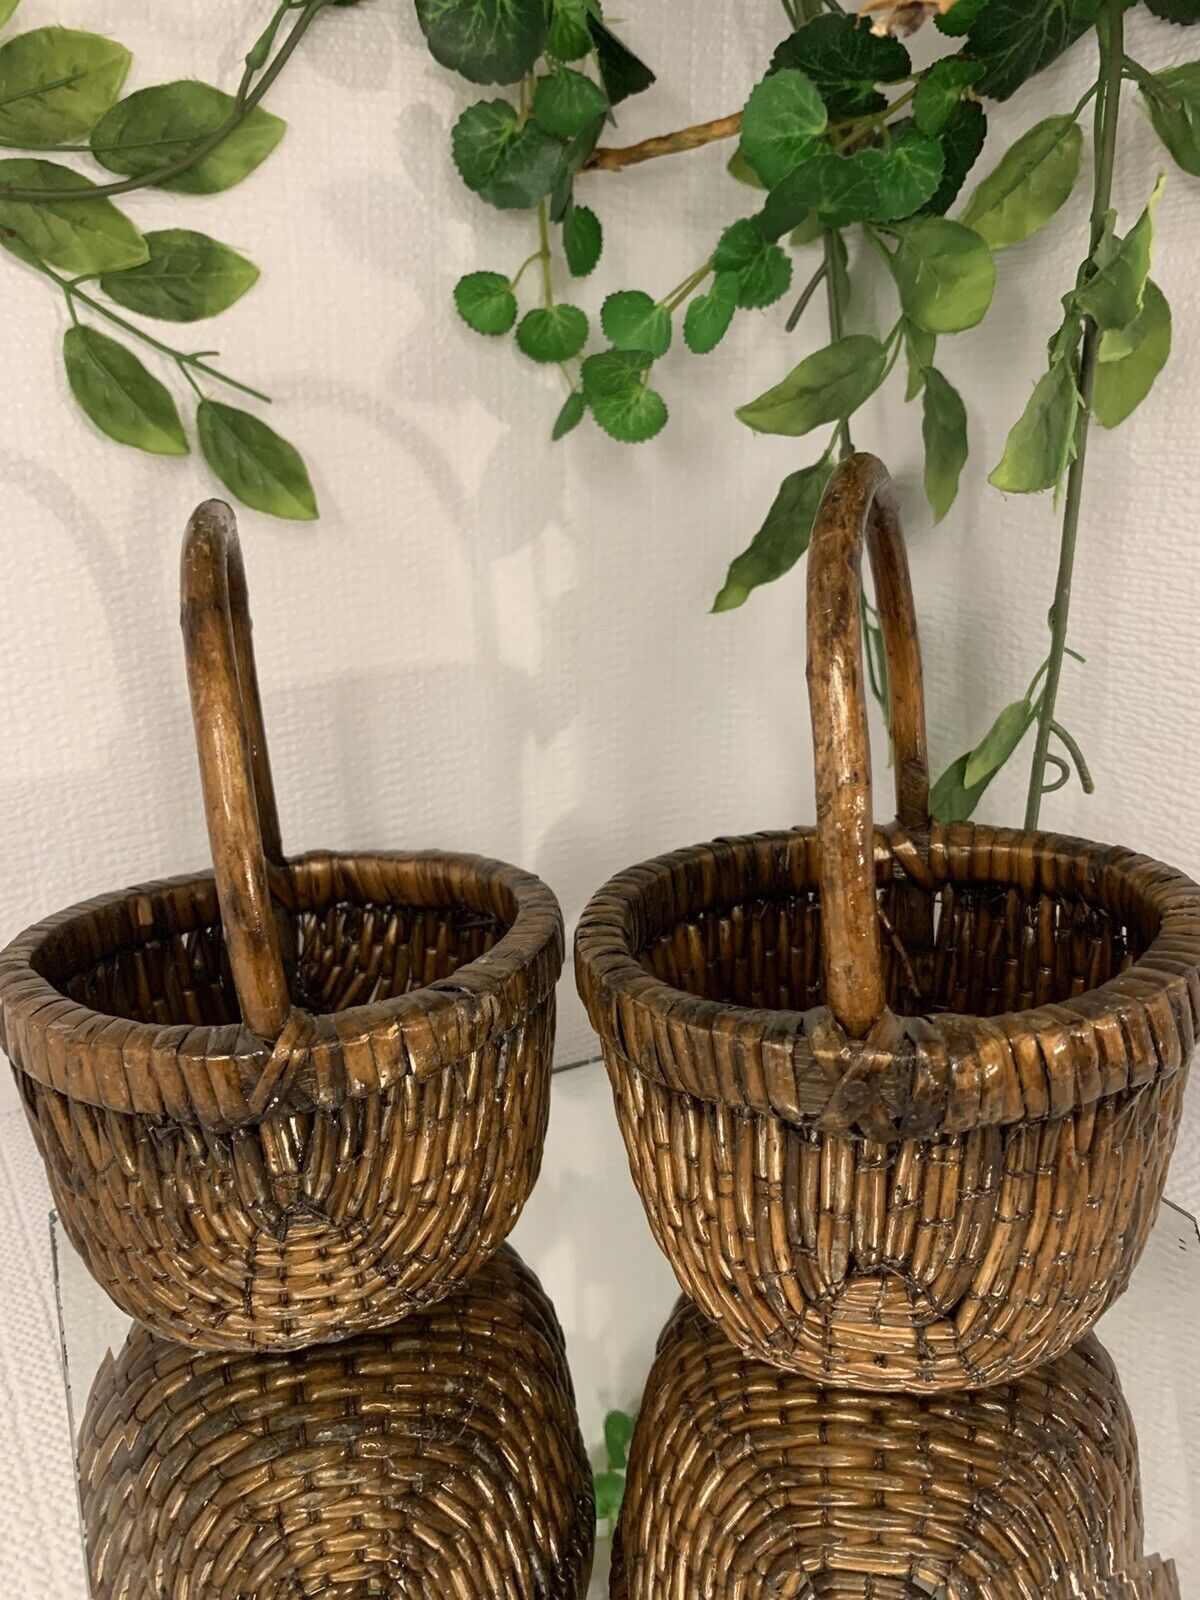 2 Small Brown woven baskets/bamboo with handles tightly woven made Well 7” Tall